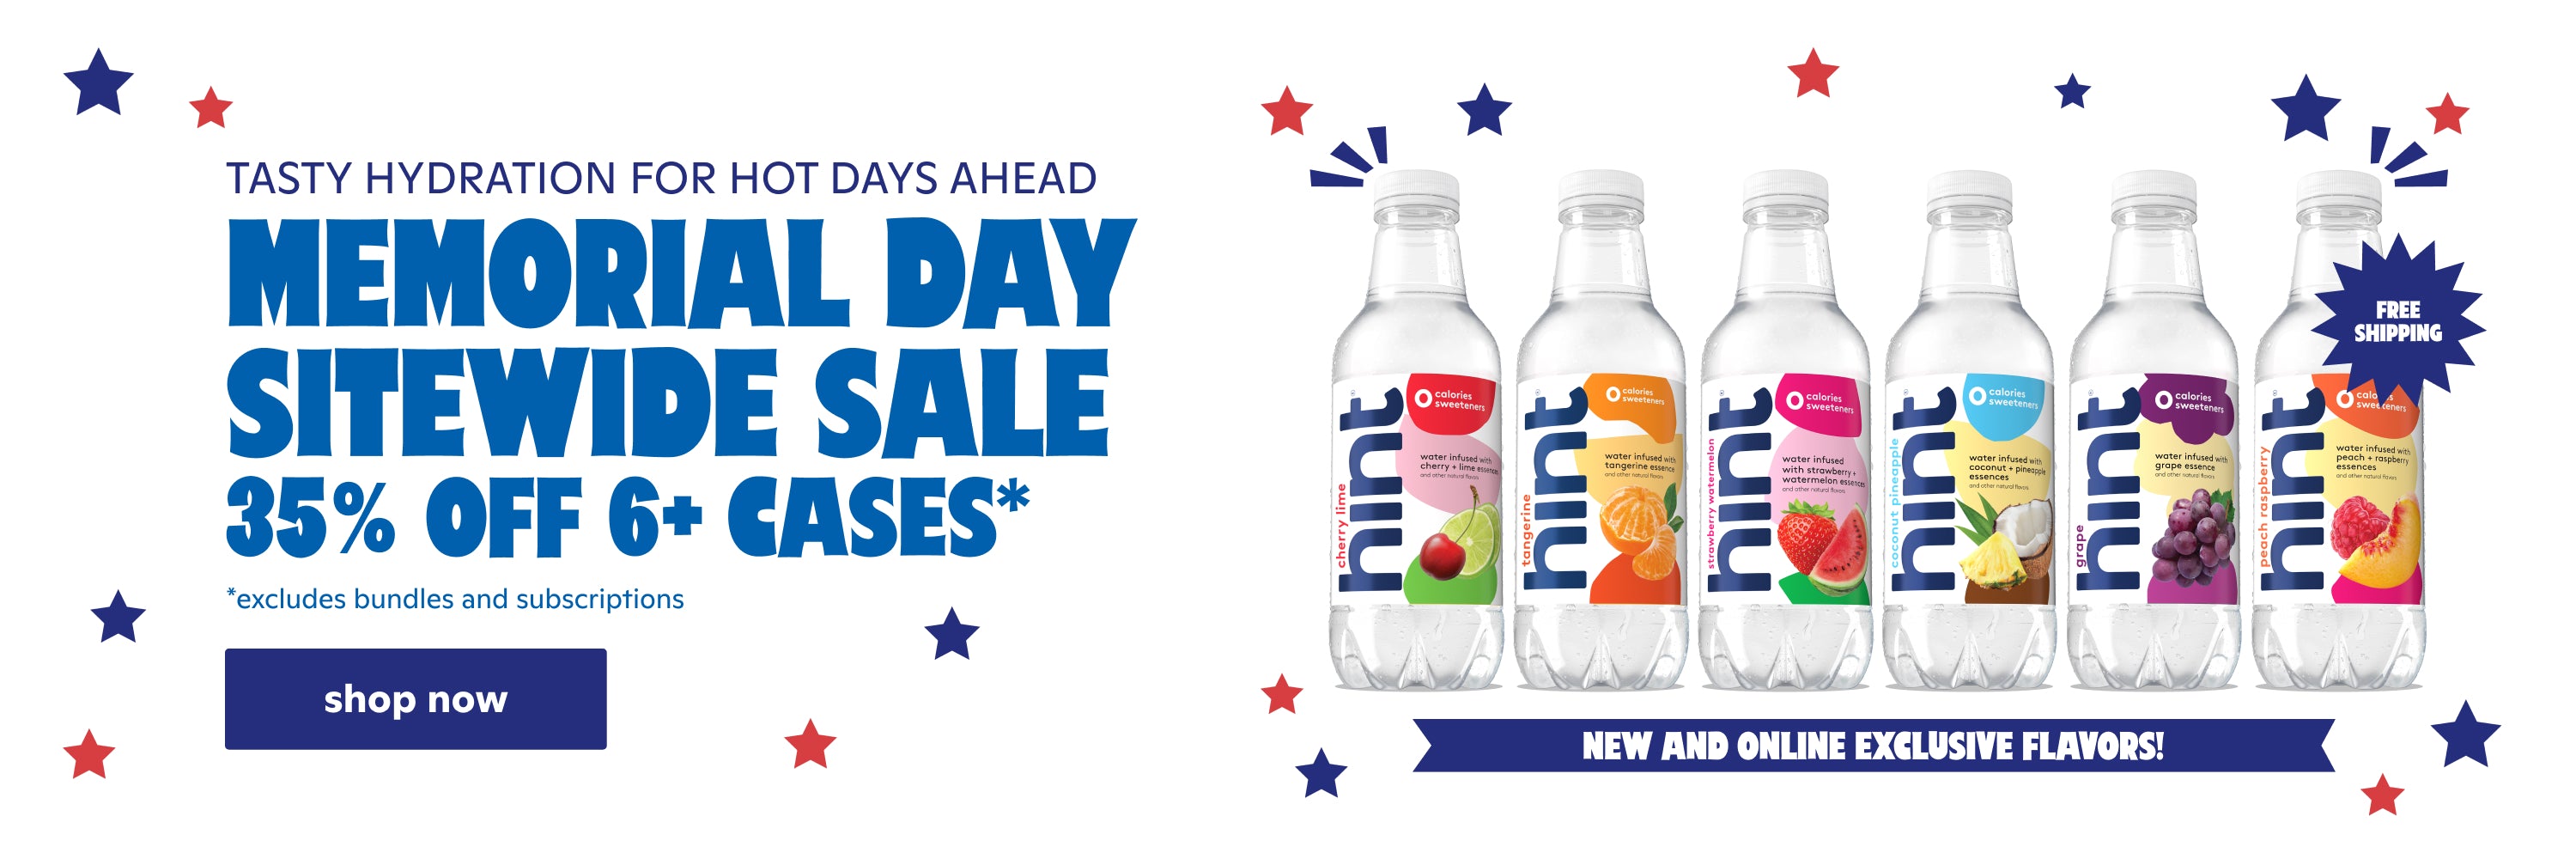 Memorial Day sitewide sale. 35% off 6+ cases. Excludes bundles and subscriptions. Shop now.